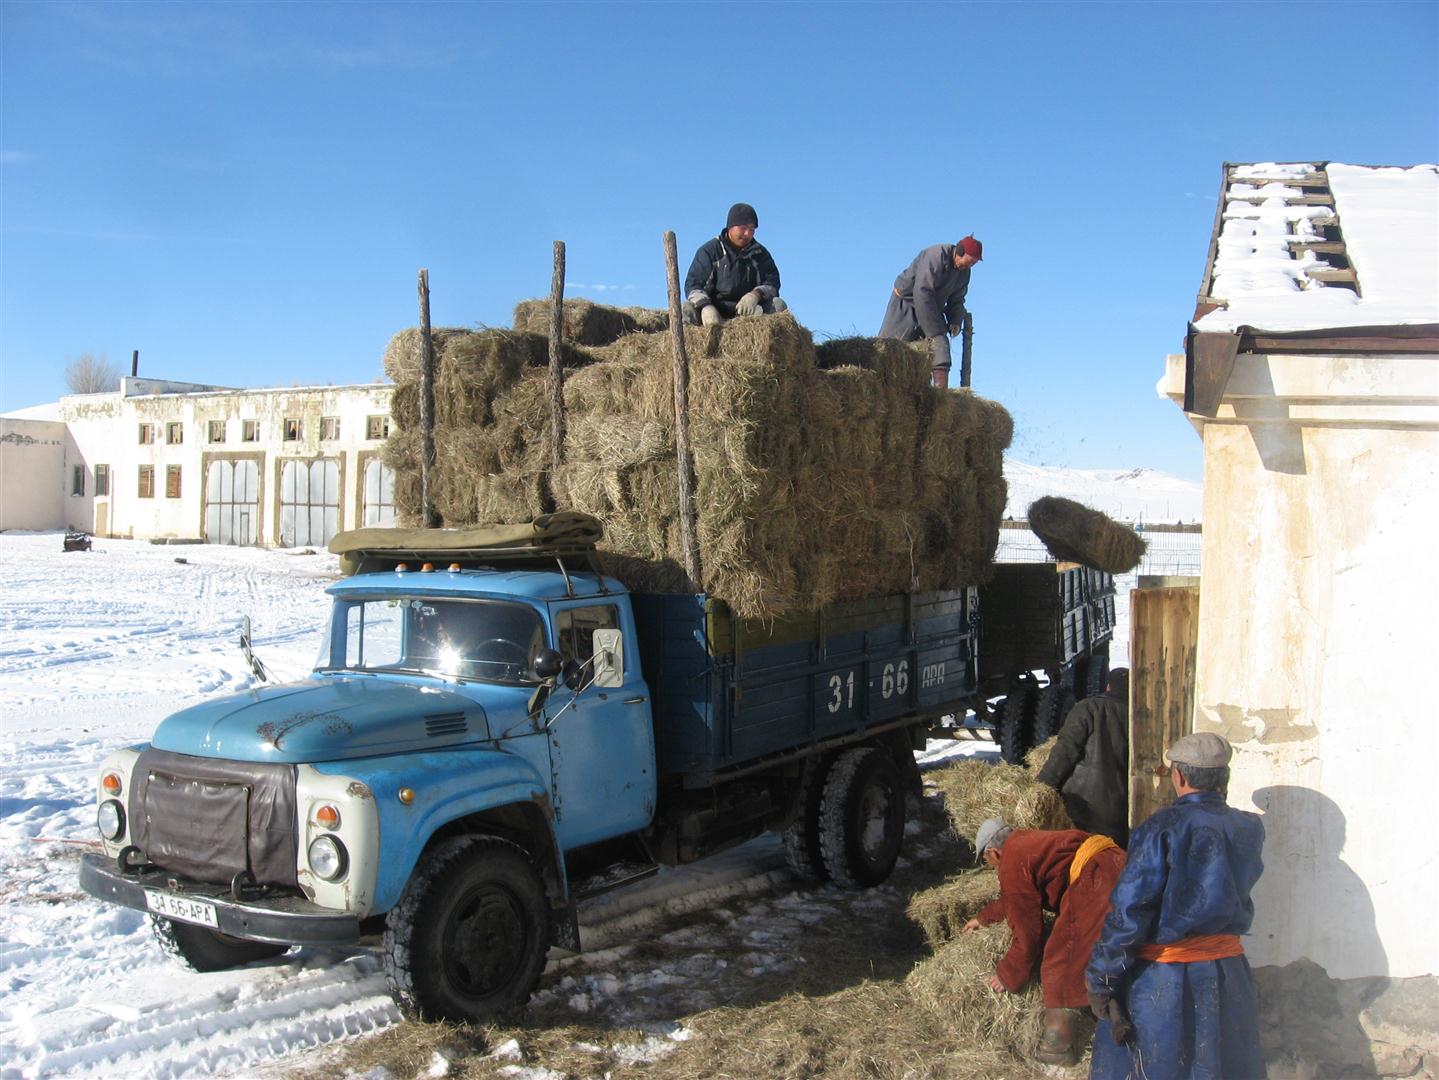 Men unloading bales of hay from a truck.